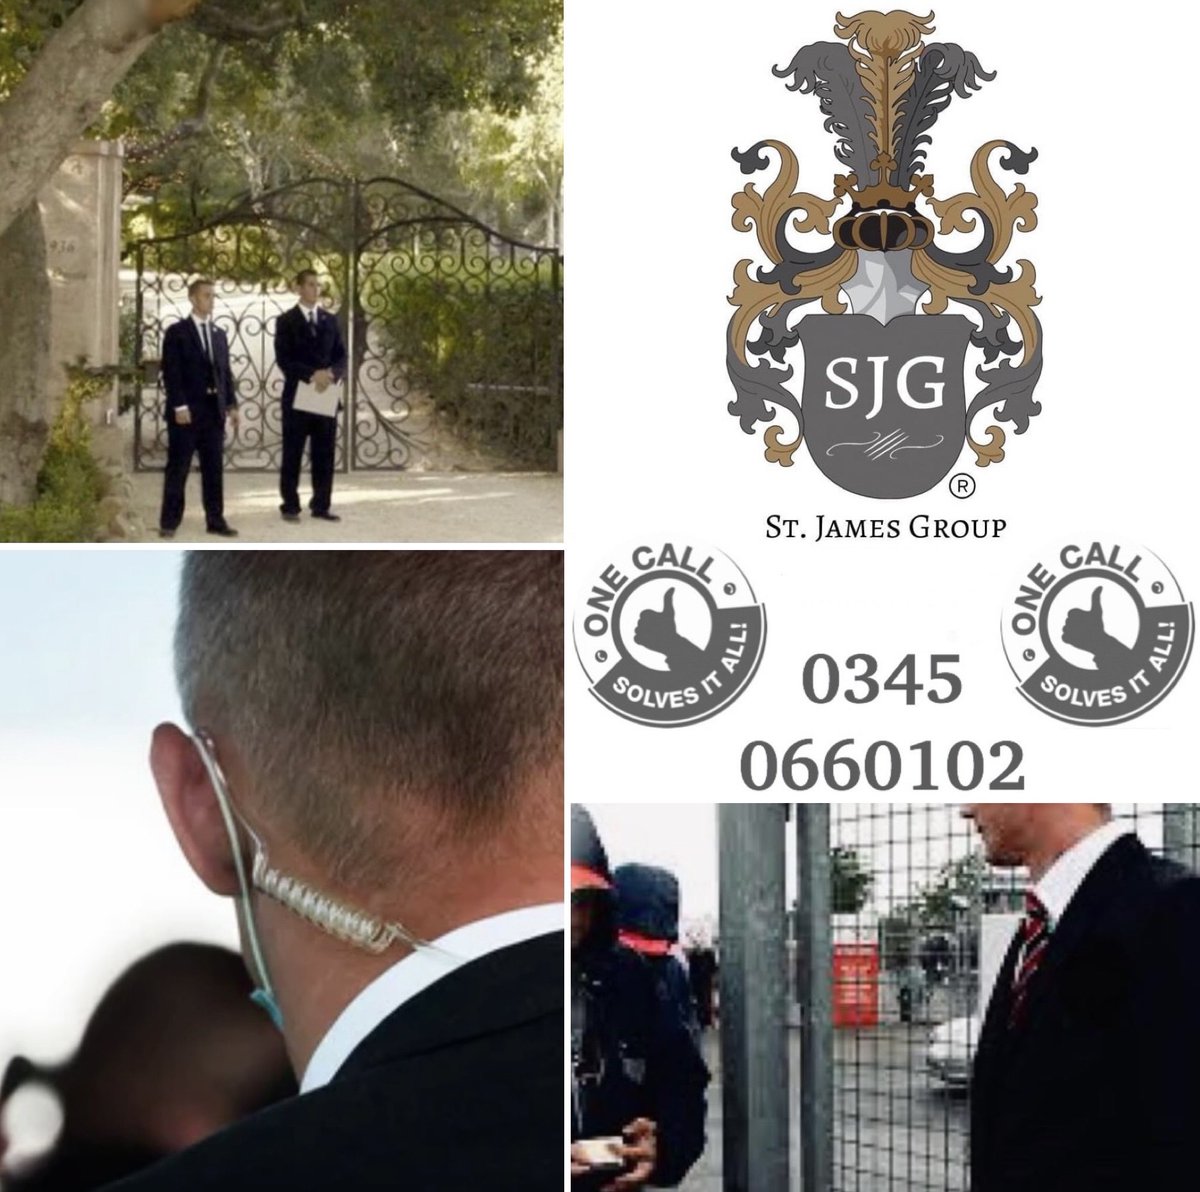 SECURITY SERVICES - SPECIAL EVENTS 

#security #staticguarding #mannedguarding #mobilepatrol #corporatesecurity  #securityindustryauthority #doorsupervisor #lossprevention #gatehouse #receptionsecurity #retailsecurity #sia #events #specialevents #party #privateparty #venue